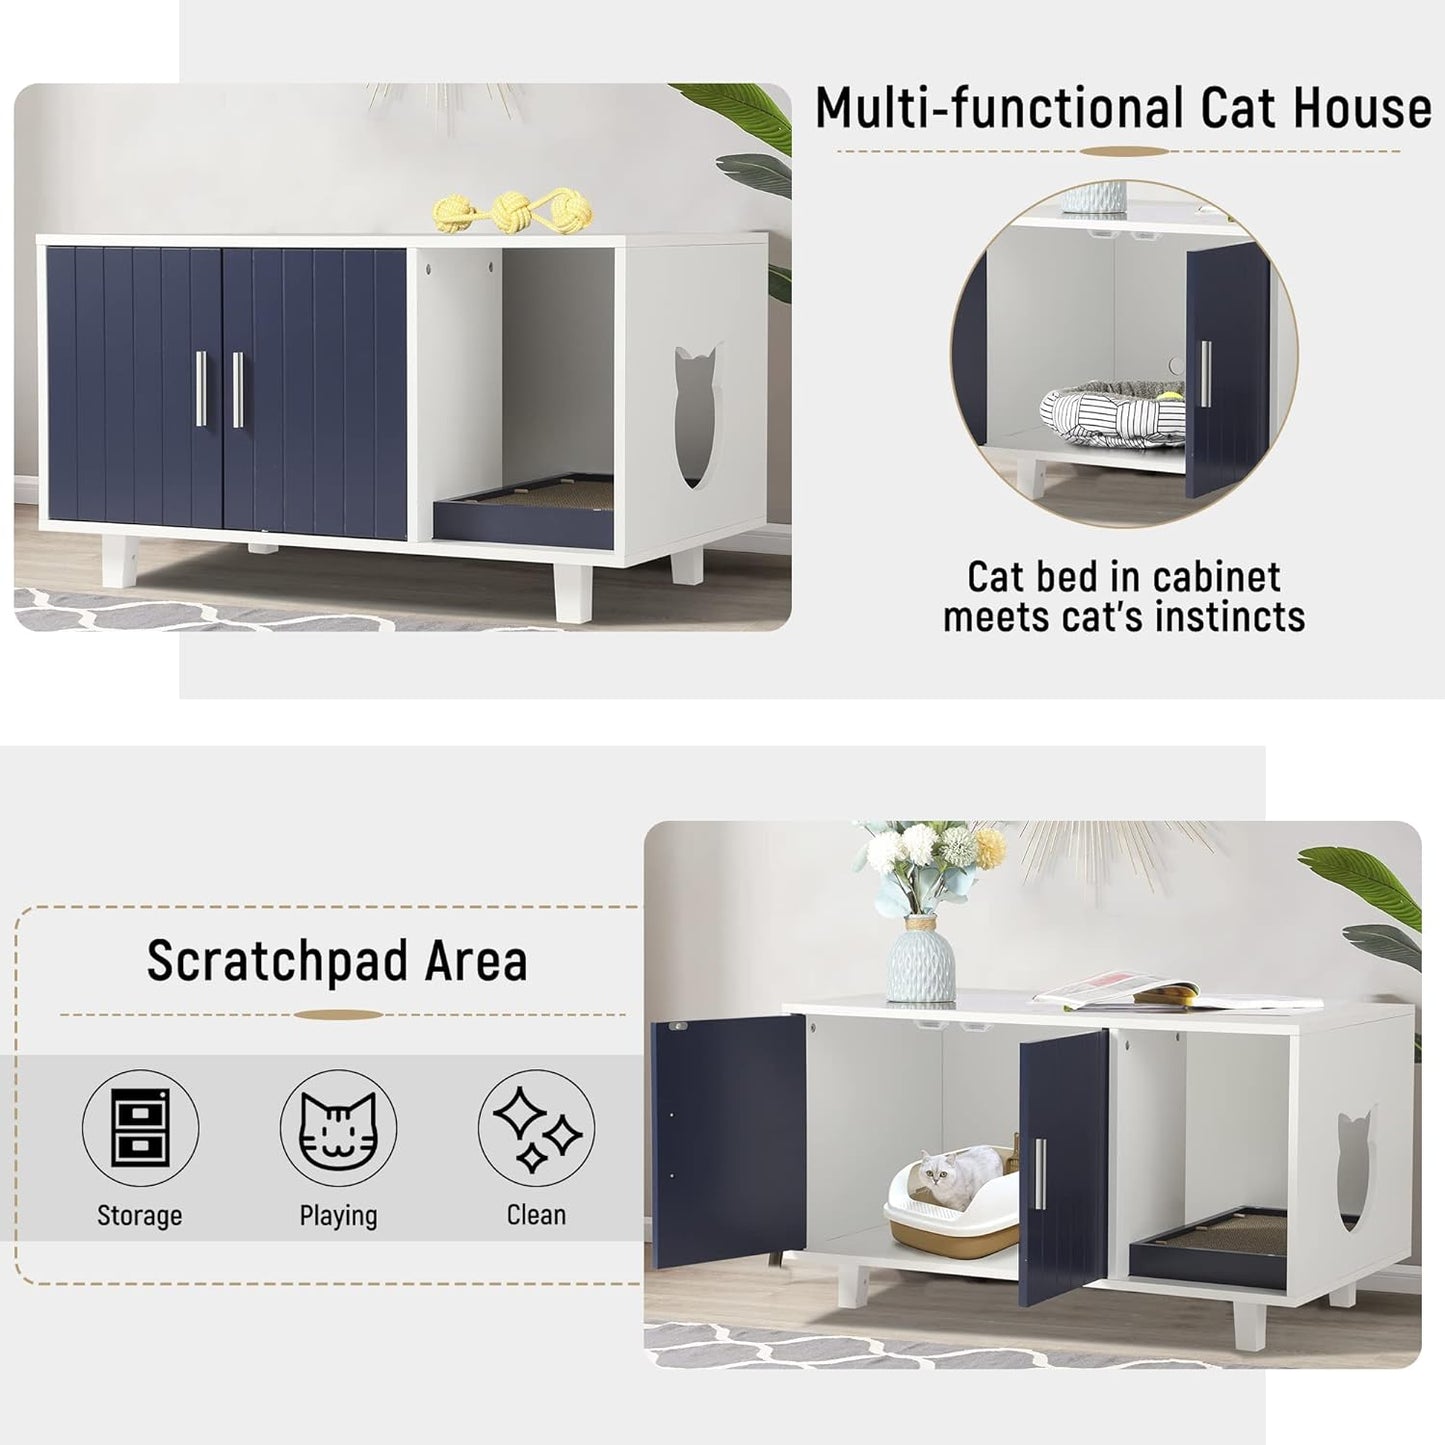 Cat Litter Box Enclosure Hidden Cat Washroom Furniture Bench with Cat Scratch Pad, Wooden Decorative Cat House End Table Nightstand, Hide Odor& Pet Poop,White Blue